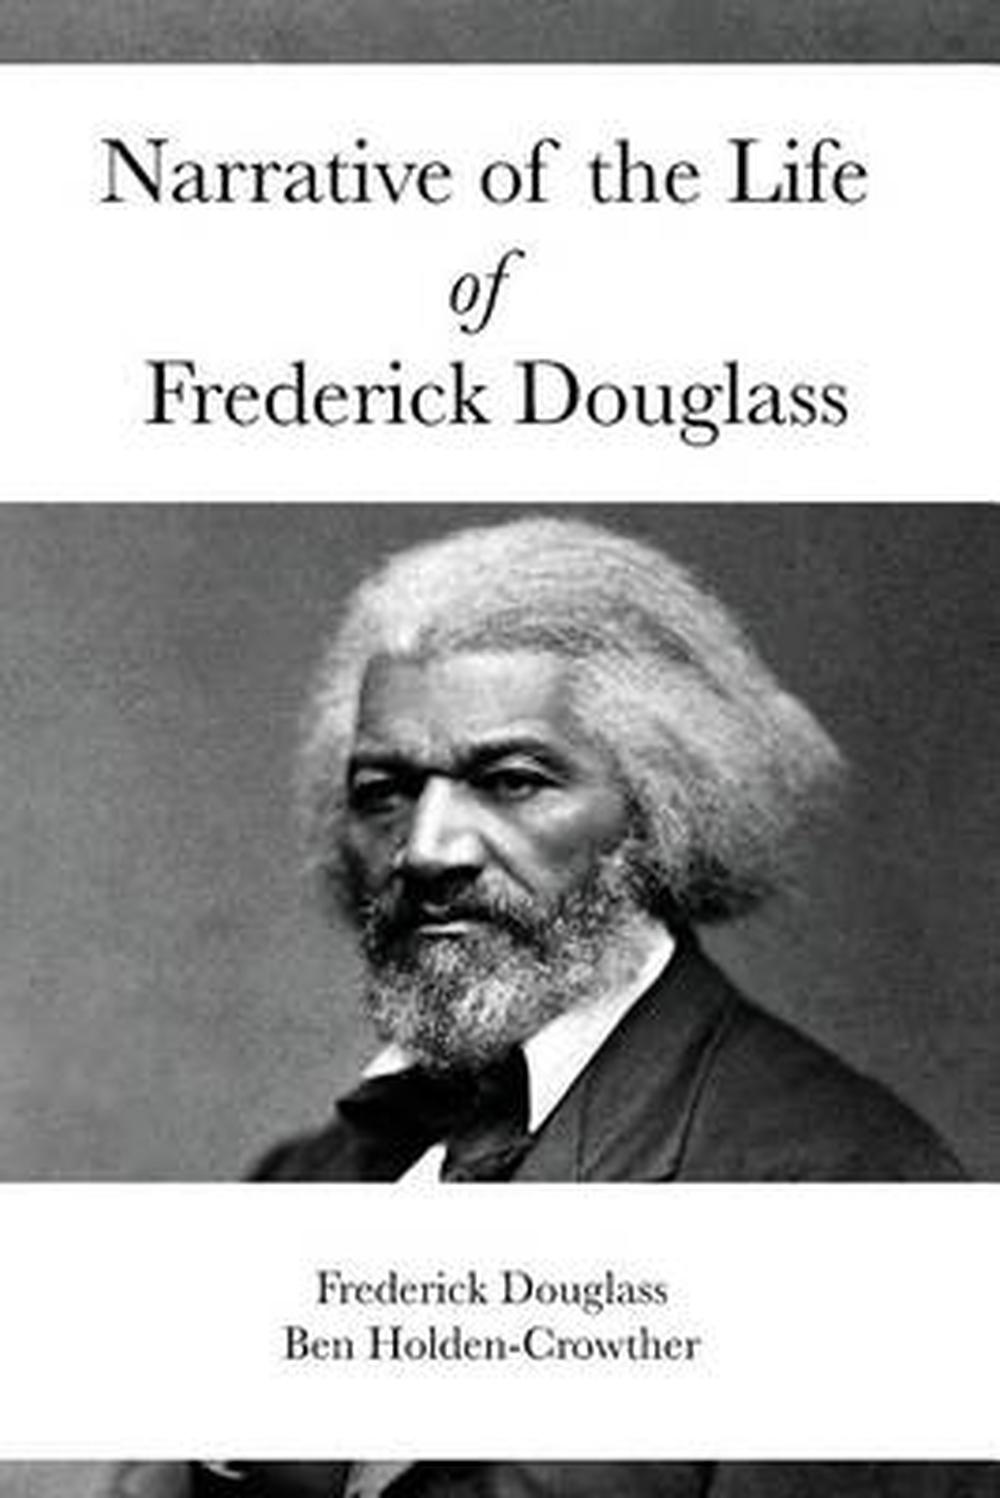 the life and narrative of frederick douglass